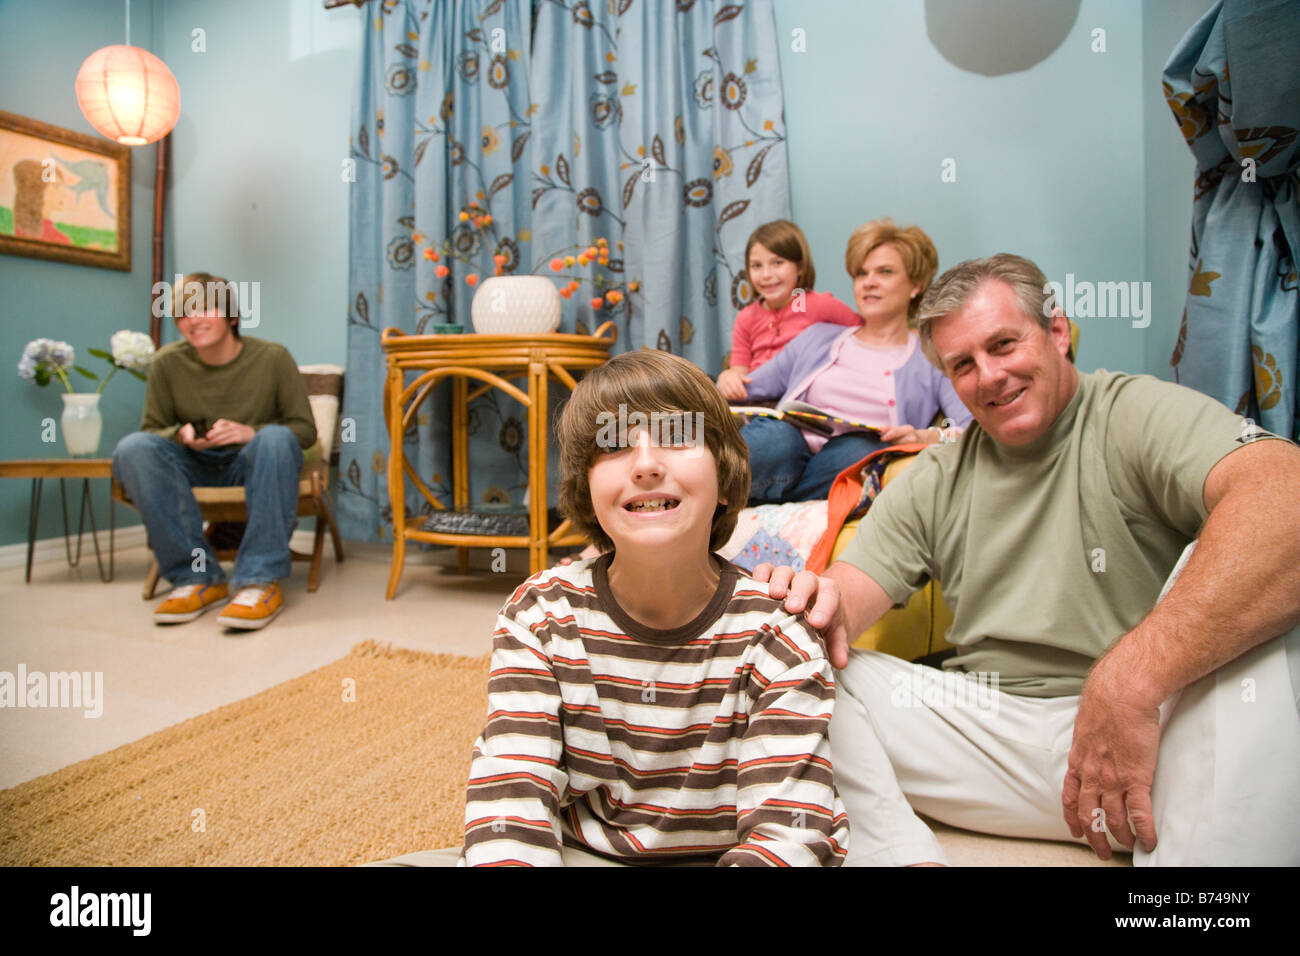 Portrait of family sitting together in living room Stock Photo